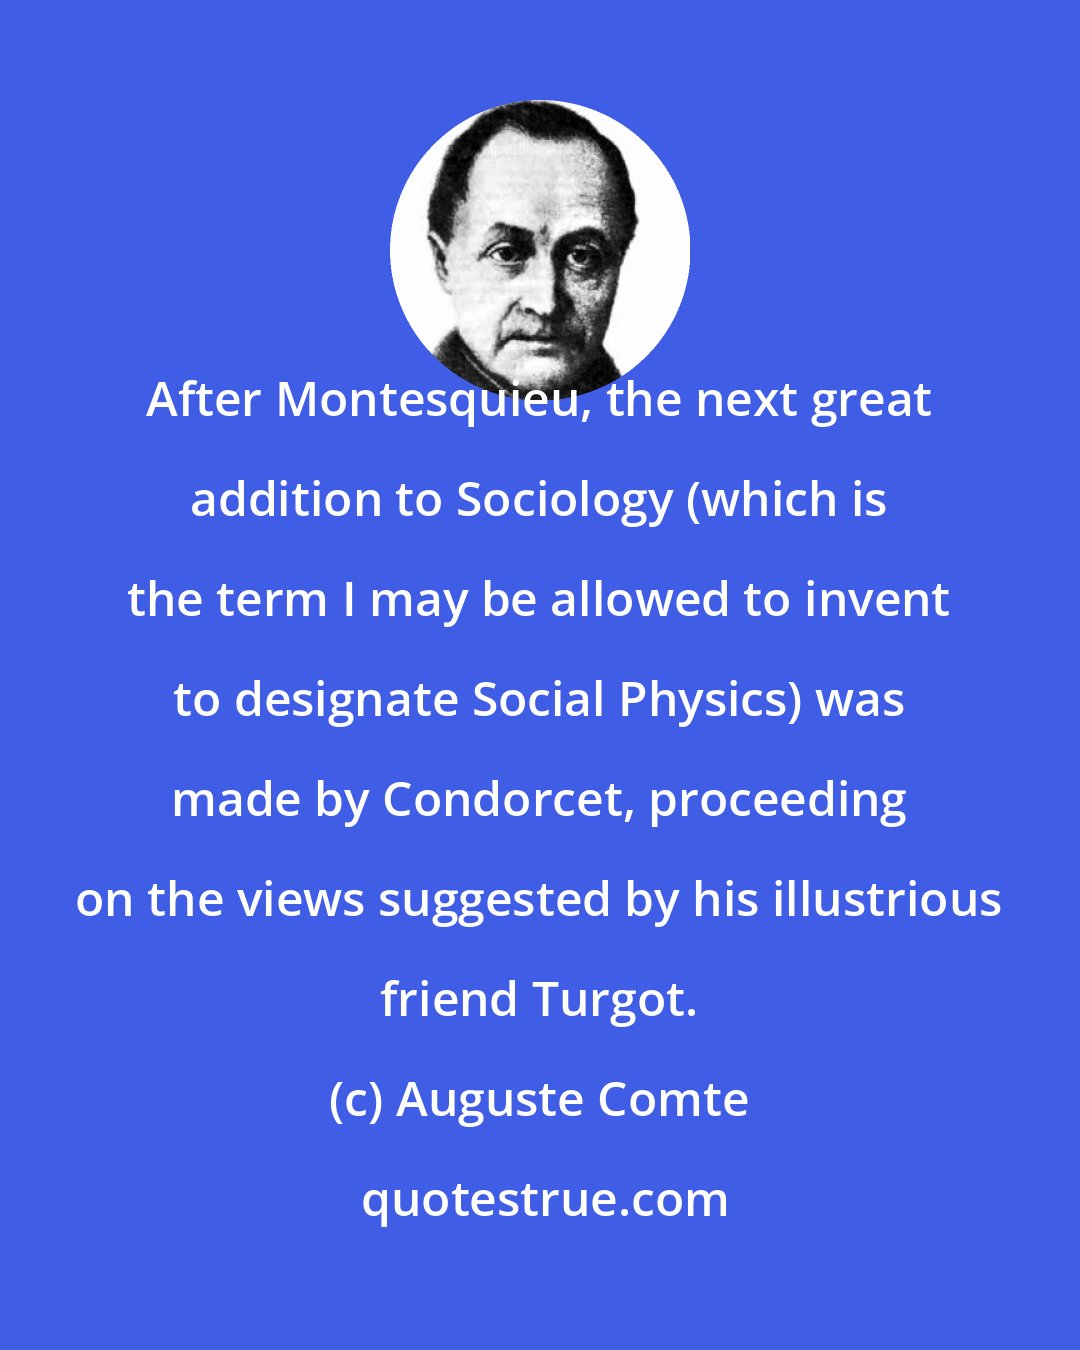 Auguste Comte: After Montesquieu, the next great addition to Sociology (which is the term I may be allowed to invent to designate Social Physics) was made by Condorcet, proceeding on the views suggested by his illustrious friend Turgot.